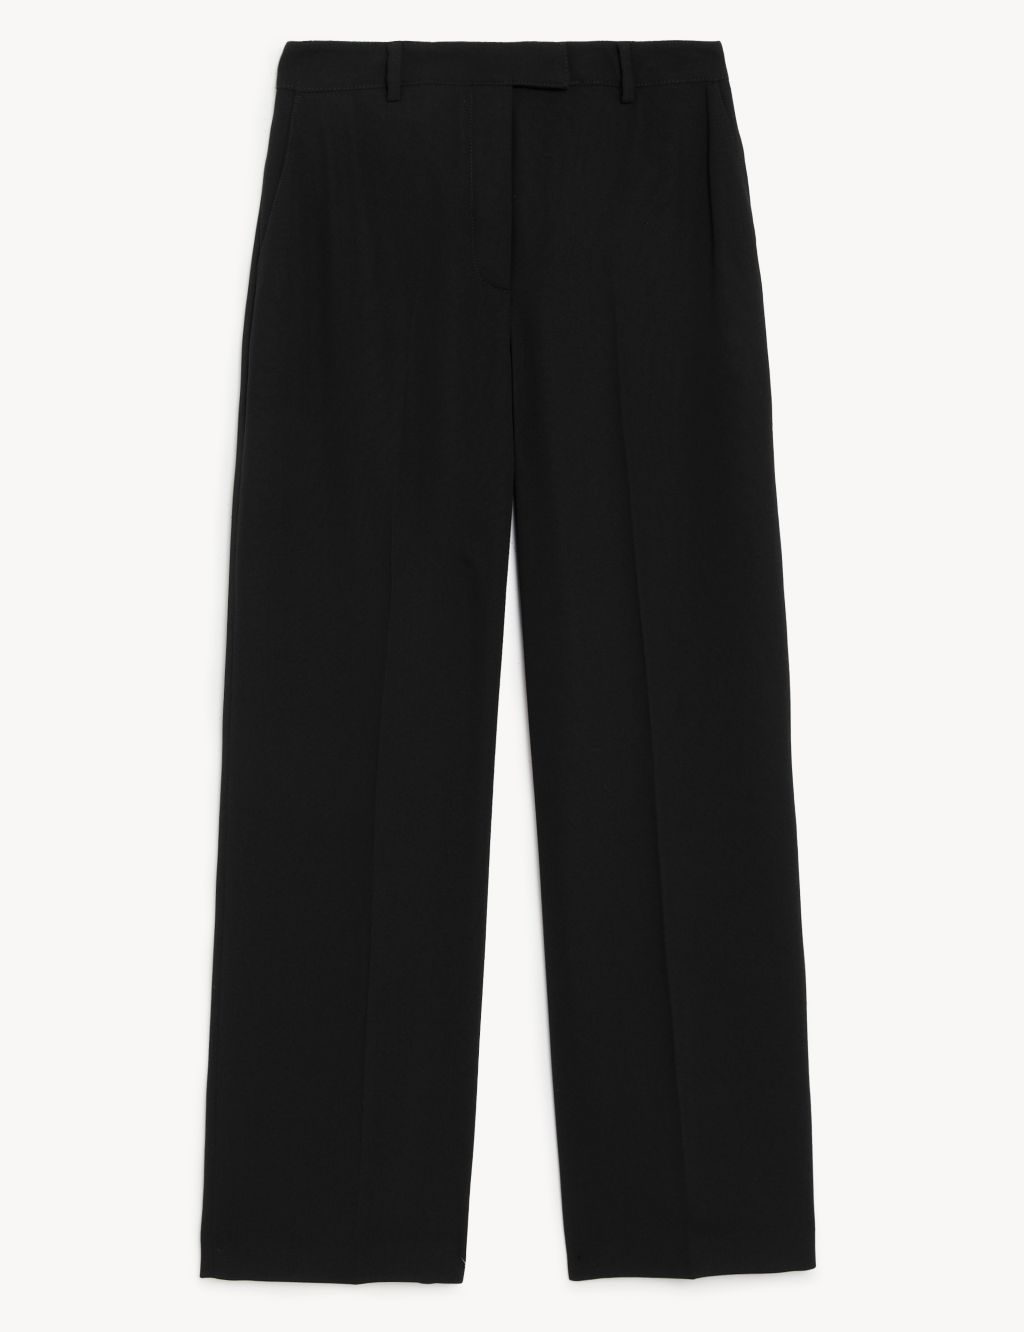 Crepe Wide Leg Trousers image 2